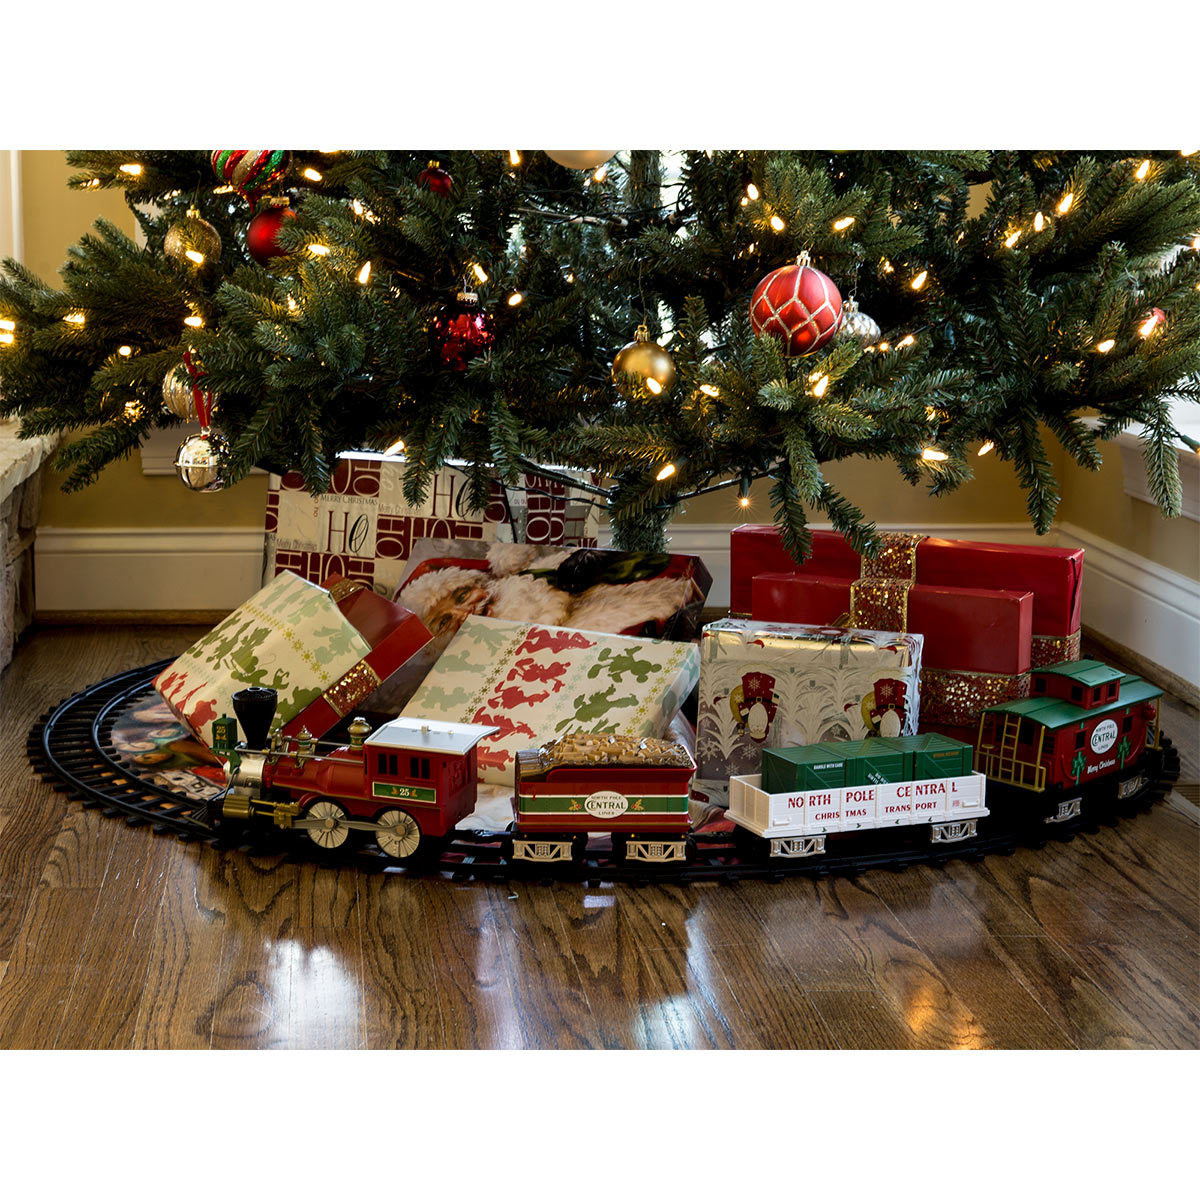 Train Sets For Under The Christmas Tree - Traditional Around The